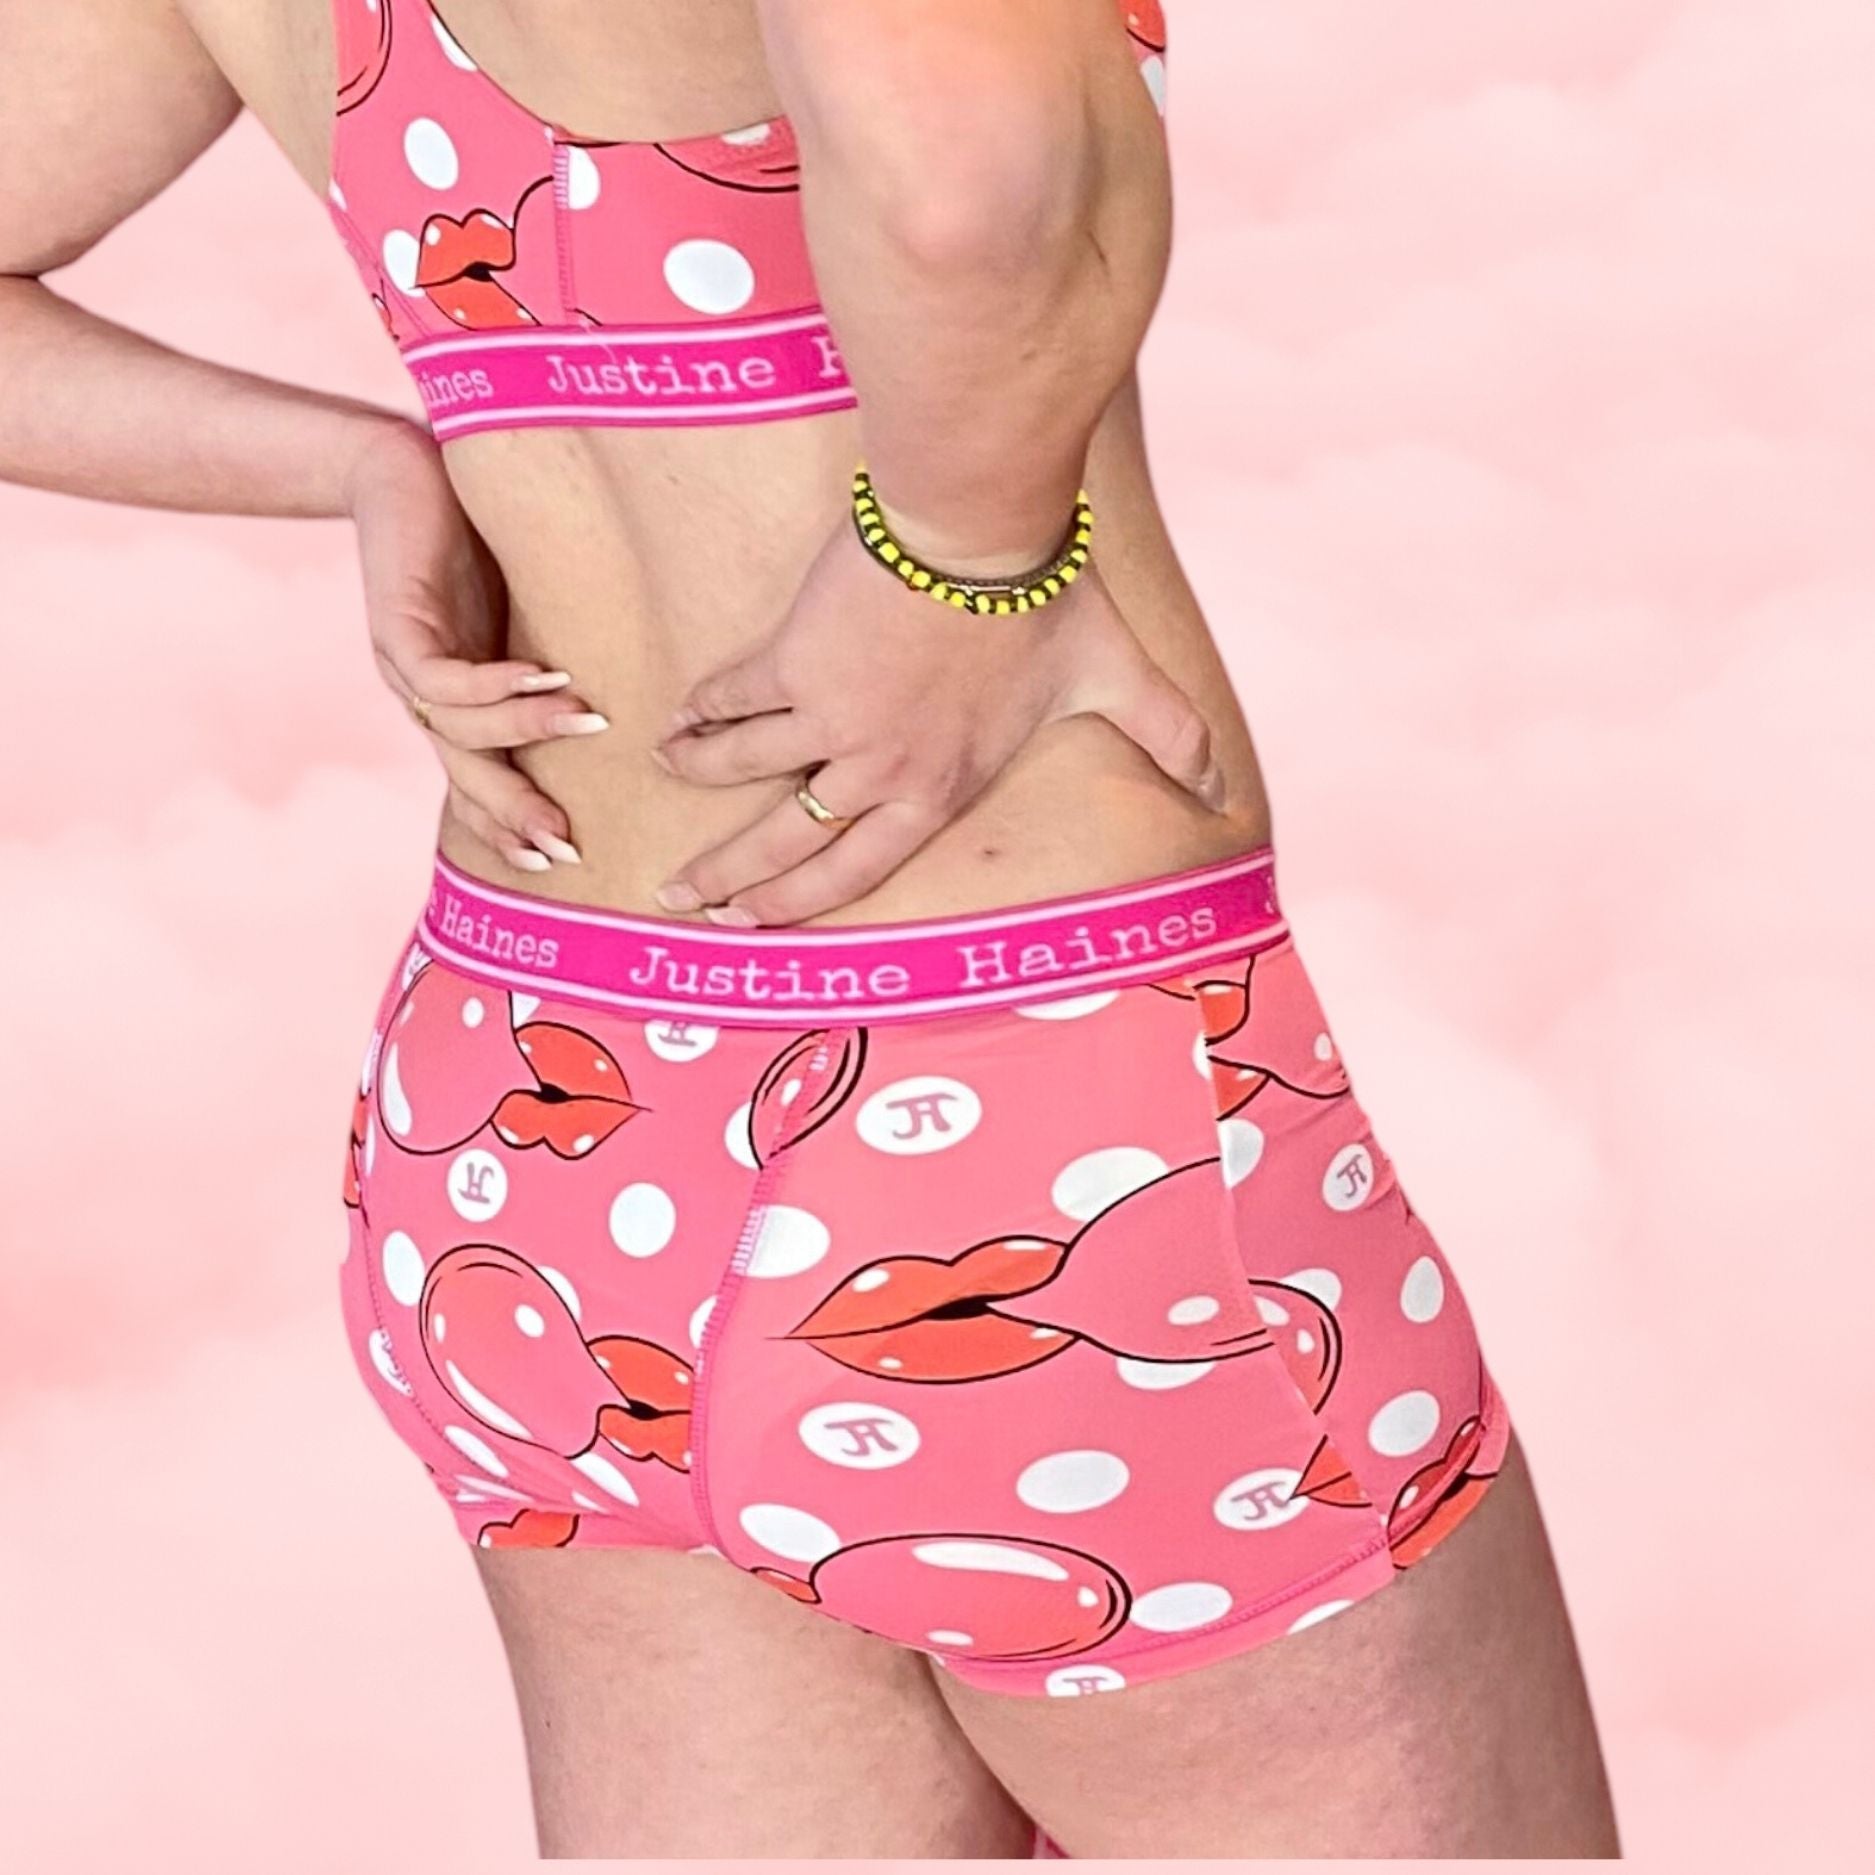 https://www.justinehaines.com/products/fashion-boxer-briefs-high-absorption-period-boyshort-in-pink-bubble-gum